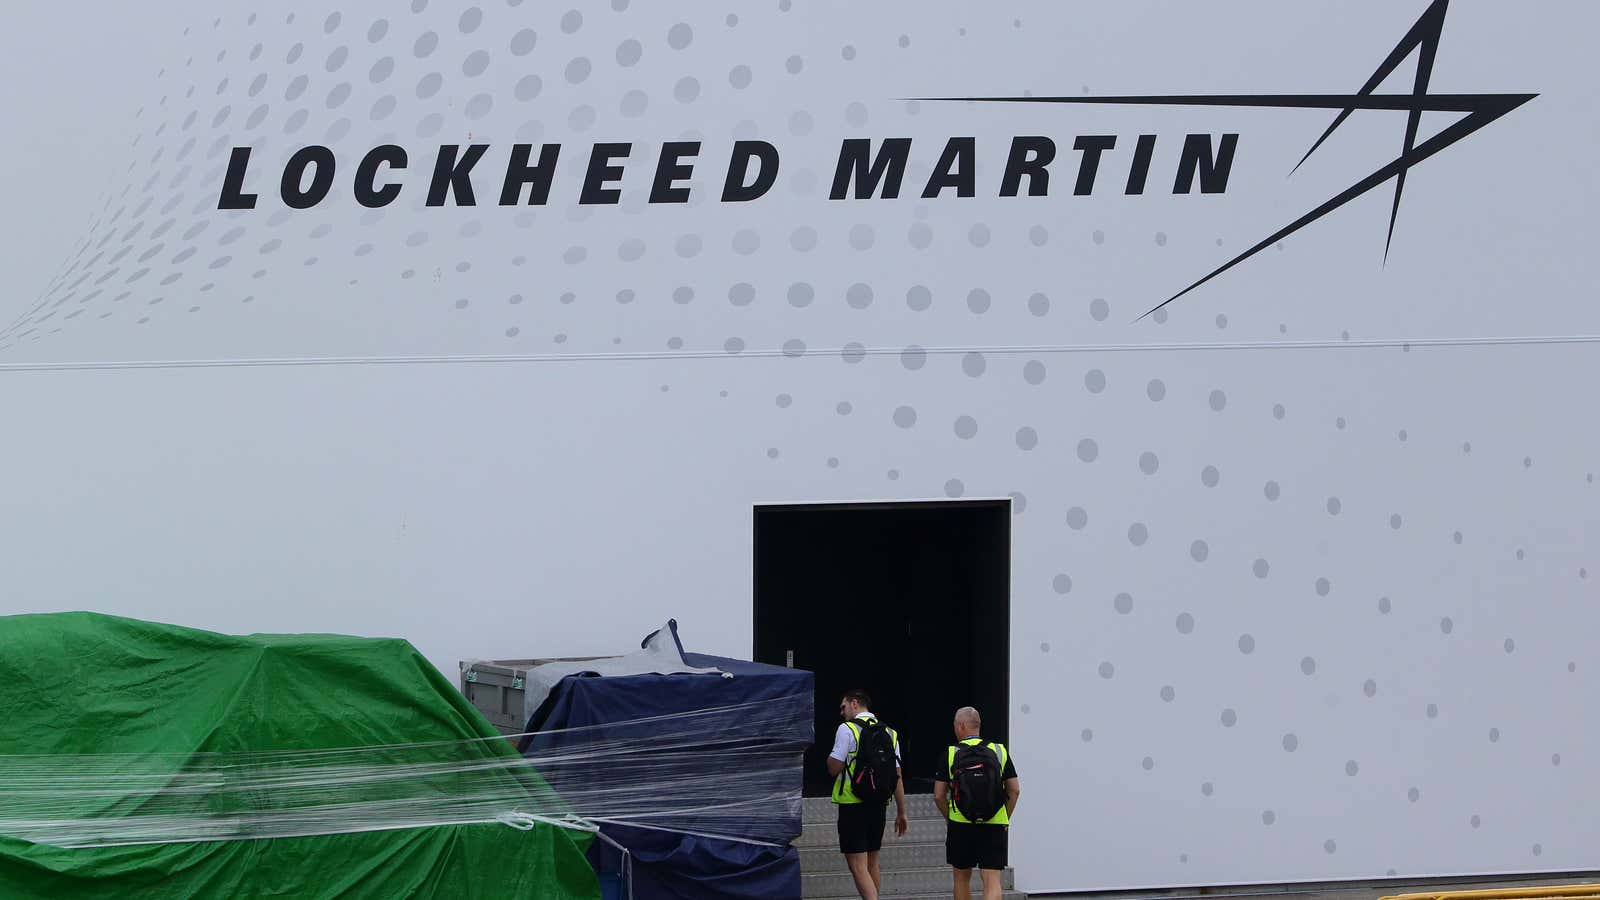 A man looks at the container goods sitting outside the Lockheed Martin booth during the Singapore Airshow media preview.